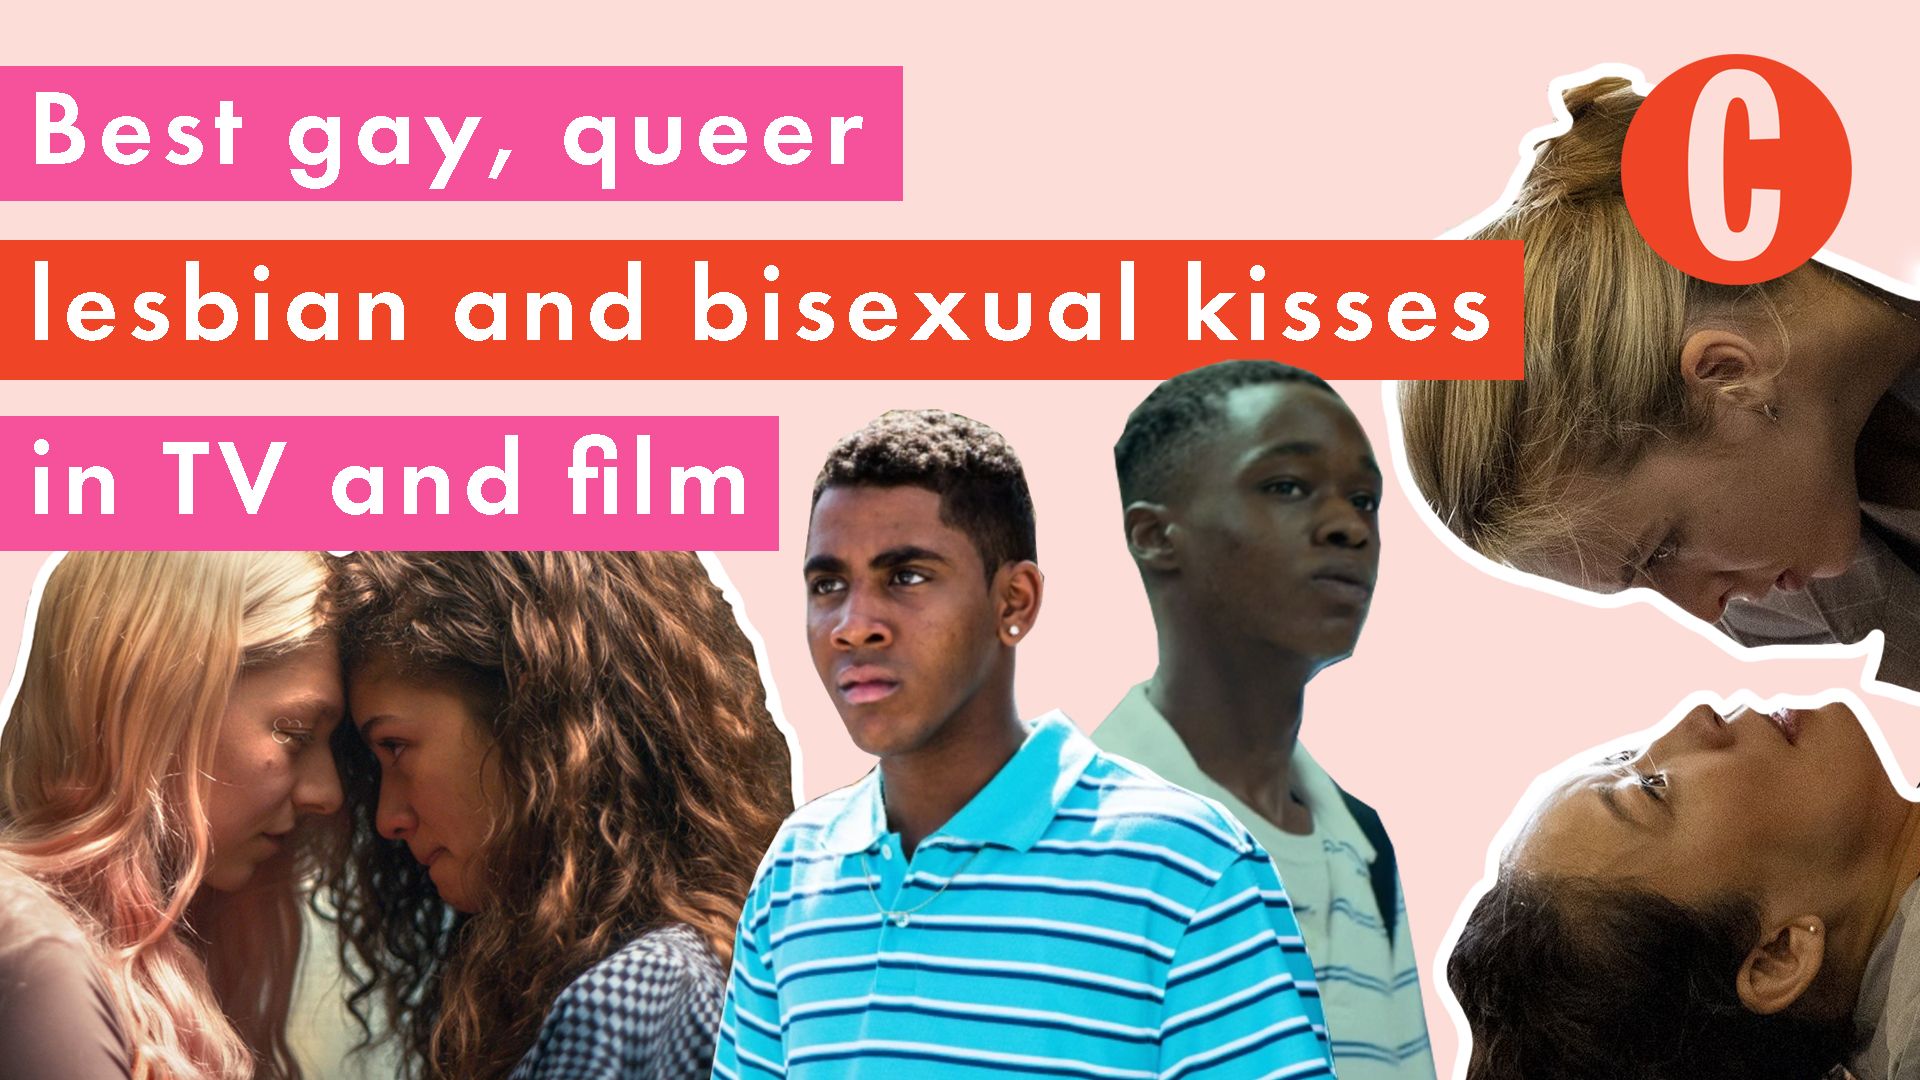 Am I Bisexual?' 19 Bisexuality Signs from Experts and Real Women